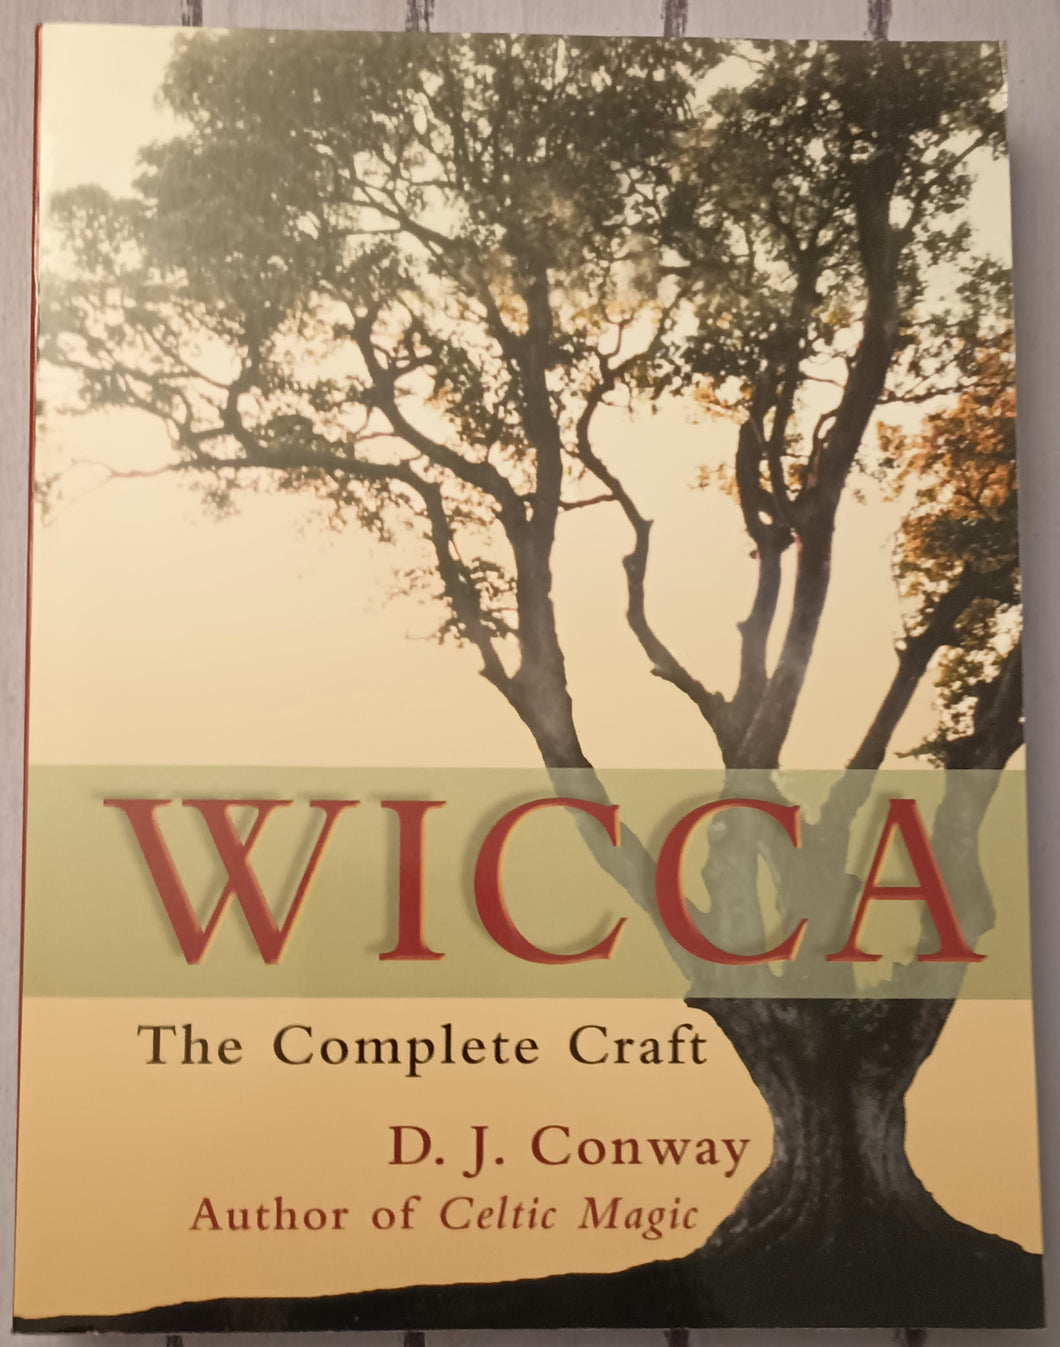 Wicca: The Complete Craft